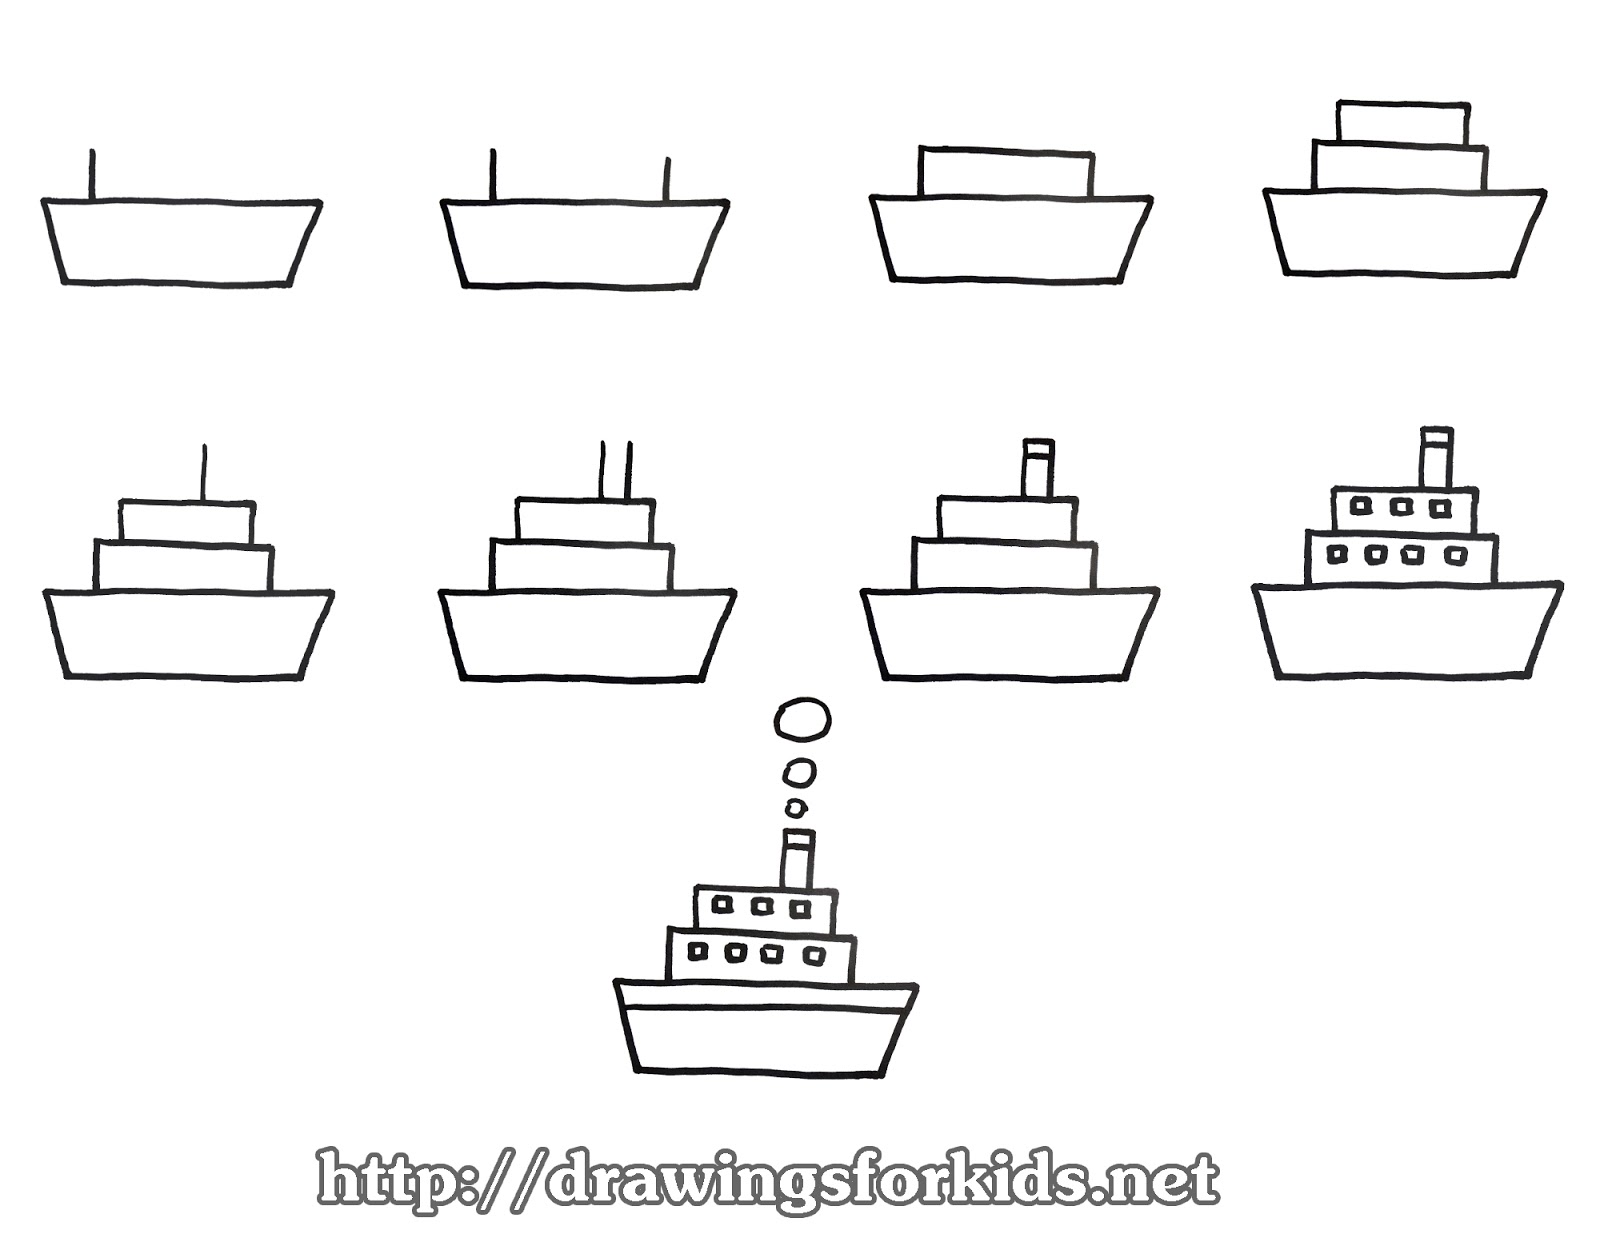 How To Draw A Boat For Kids - Drawingsforkids.Net